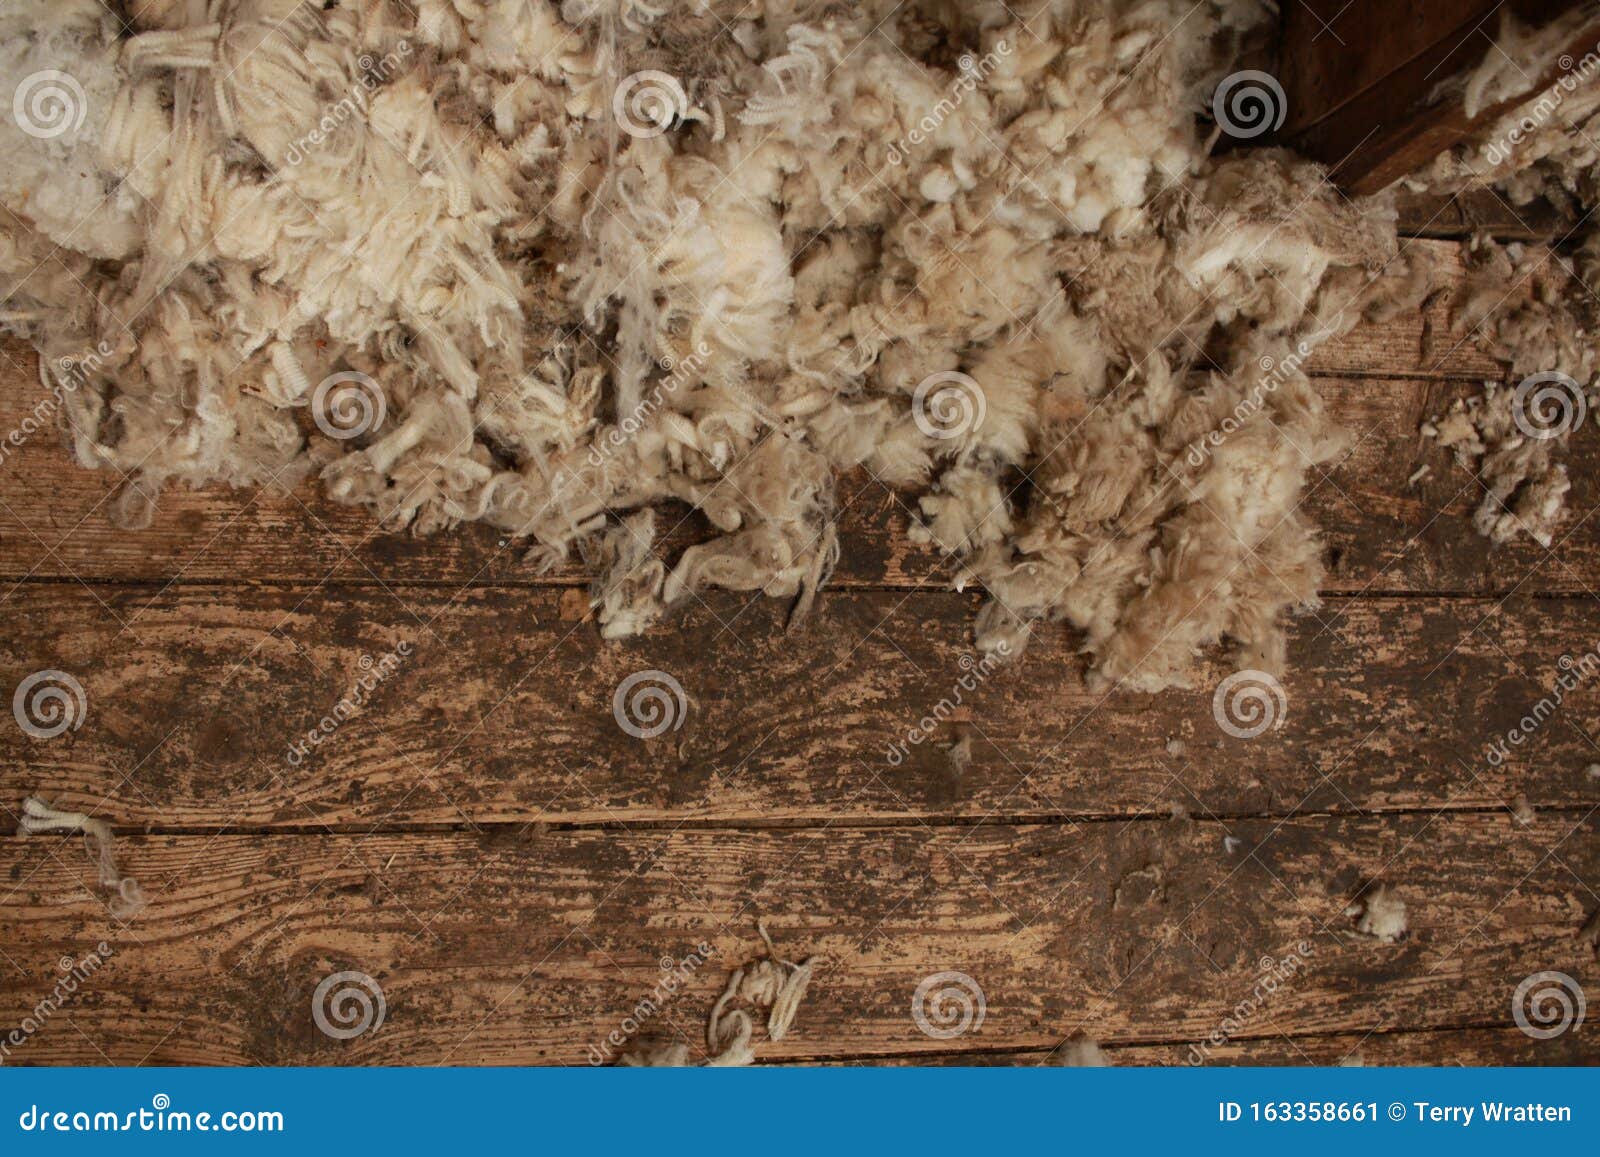 Piles Of Freshly Shorn Wool Scattered On The Timber Floor 